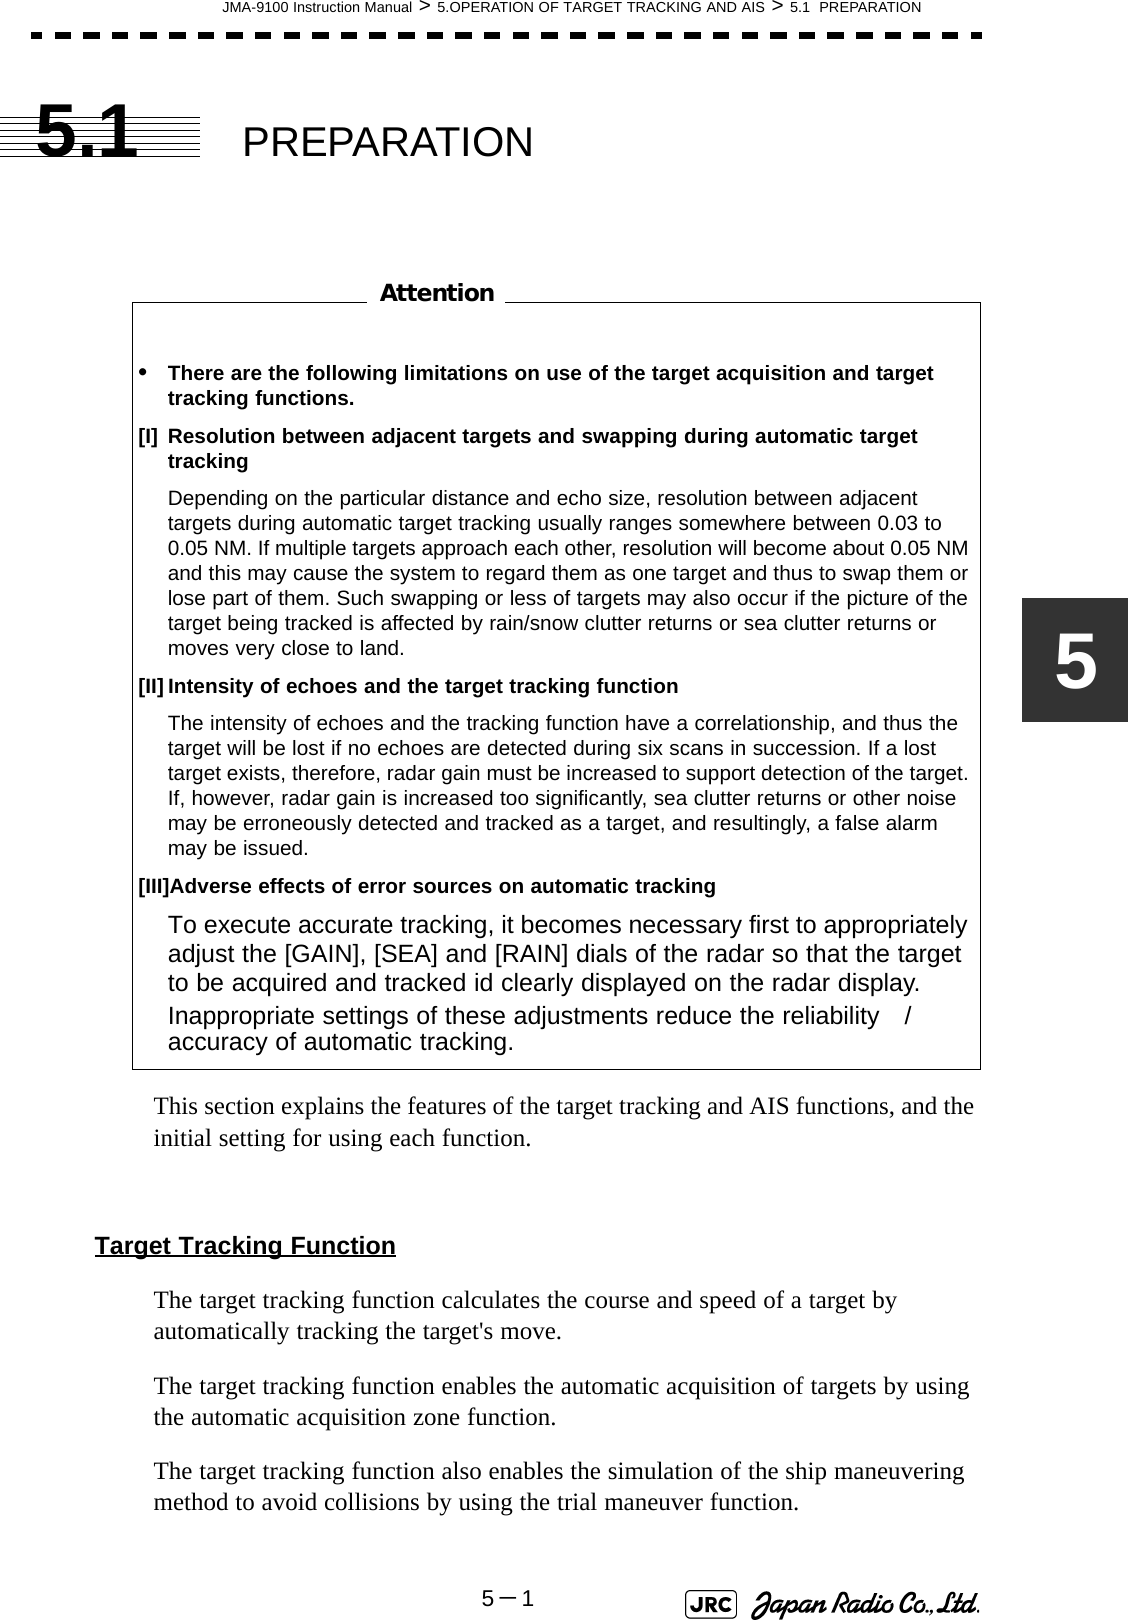 JMA-9100 Instruction Manual &gt; 5.OPERATION OF TARGET TRACKING AND AIS &gt; 5.1  PREPARATION5－155.1 PREPARATION　　　　　　　　This section explains the features of the target tracking and AIS functions, and the initial setting for using each function.Target Tracking FunctionThe target tracking function calculates the course and speed of a target by automatically tracking the target&apos;s move. The target tracking function enables the automatic acquisition of targets by using the automatic acquisition zone function.  The target tracking function also enables the simulation of the ship maneuvering method to avoid collisions by using the trial maneuver function.•There are the following limitations on use of the target acquisition and target tracking functions.[I] Resolution between adjacent targets and swapping during automatic target trackingDepending on the particular distance and echo size, resolution between adjacent targets during automatic target tracking usually ranges somewhere between 0.03 to 0.05 NM. If multiple targets approach each other, resolution will become about 0.05 NM and this may cause the system to regard them as one target and thus to swap them or lose part of them. Such swapping or less of targets may also occur if the picture of the target being tracked is affected by rain/snow clutter returns or sea clutter returns or moves very close to land.[II] Intensity of echoes and the target tracking functionThe intensity of echoes and the tracking function have a correlationship, and thus the target will be lost if no echoes are detected during six scans in succession. If a lost target exists, therefore, radar gain must be increased to support detection of the target. If, however, radar gain is increased too significantly, sea clutter returns or other noise may be erroneously detected and tracked as a target, and resultingly, a false alarm may be issued.[III]Adverse effects of error sources on automatic trackingTo execute accurate tracking, it becomes necessary first to appropriately adjust the [GAIN], [SEA] and [RAIN] dials of the radar so that the target to be acquired and tracked id clearly displayed on the radar display. Inappropriate settings of these adjustments reduce the reliability　/　accuracy of automatic tracking.Attention